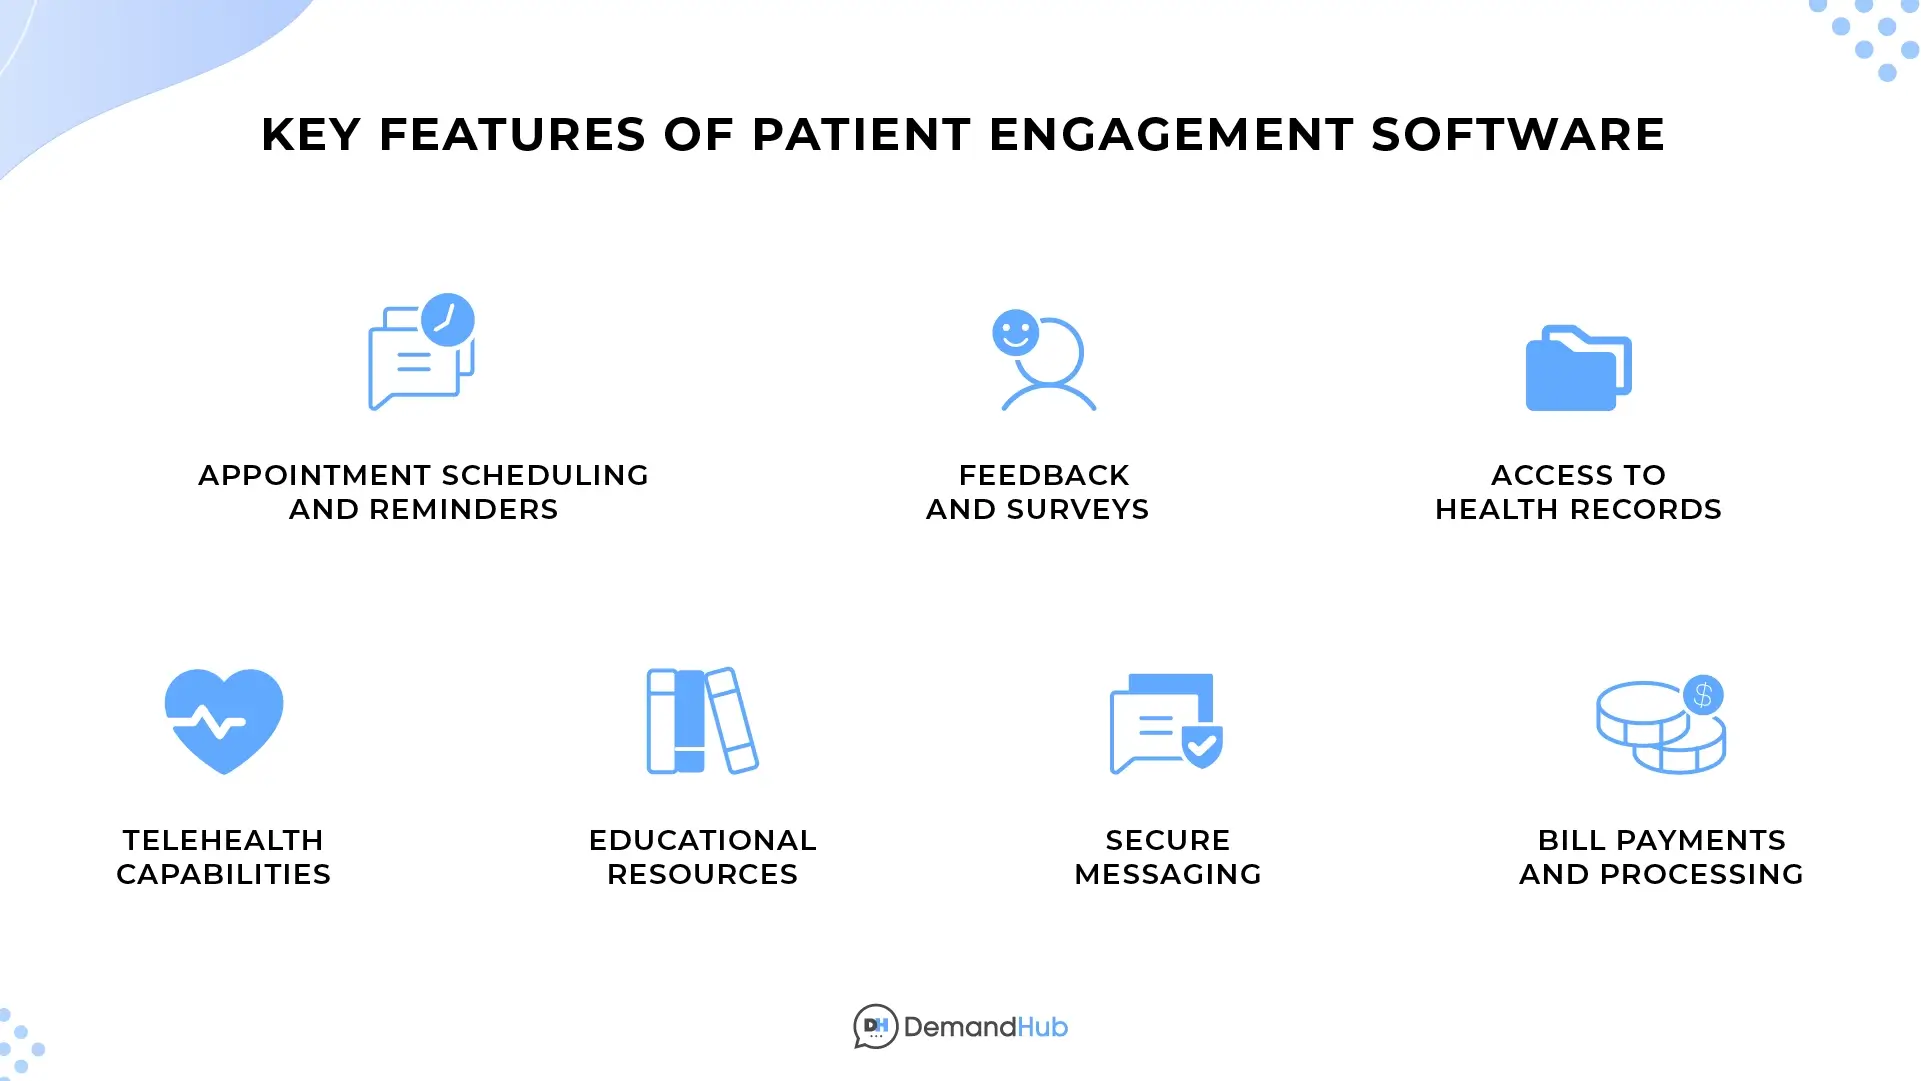 Key Features of Patient Engagement Software